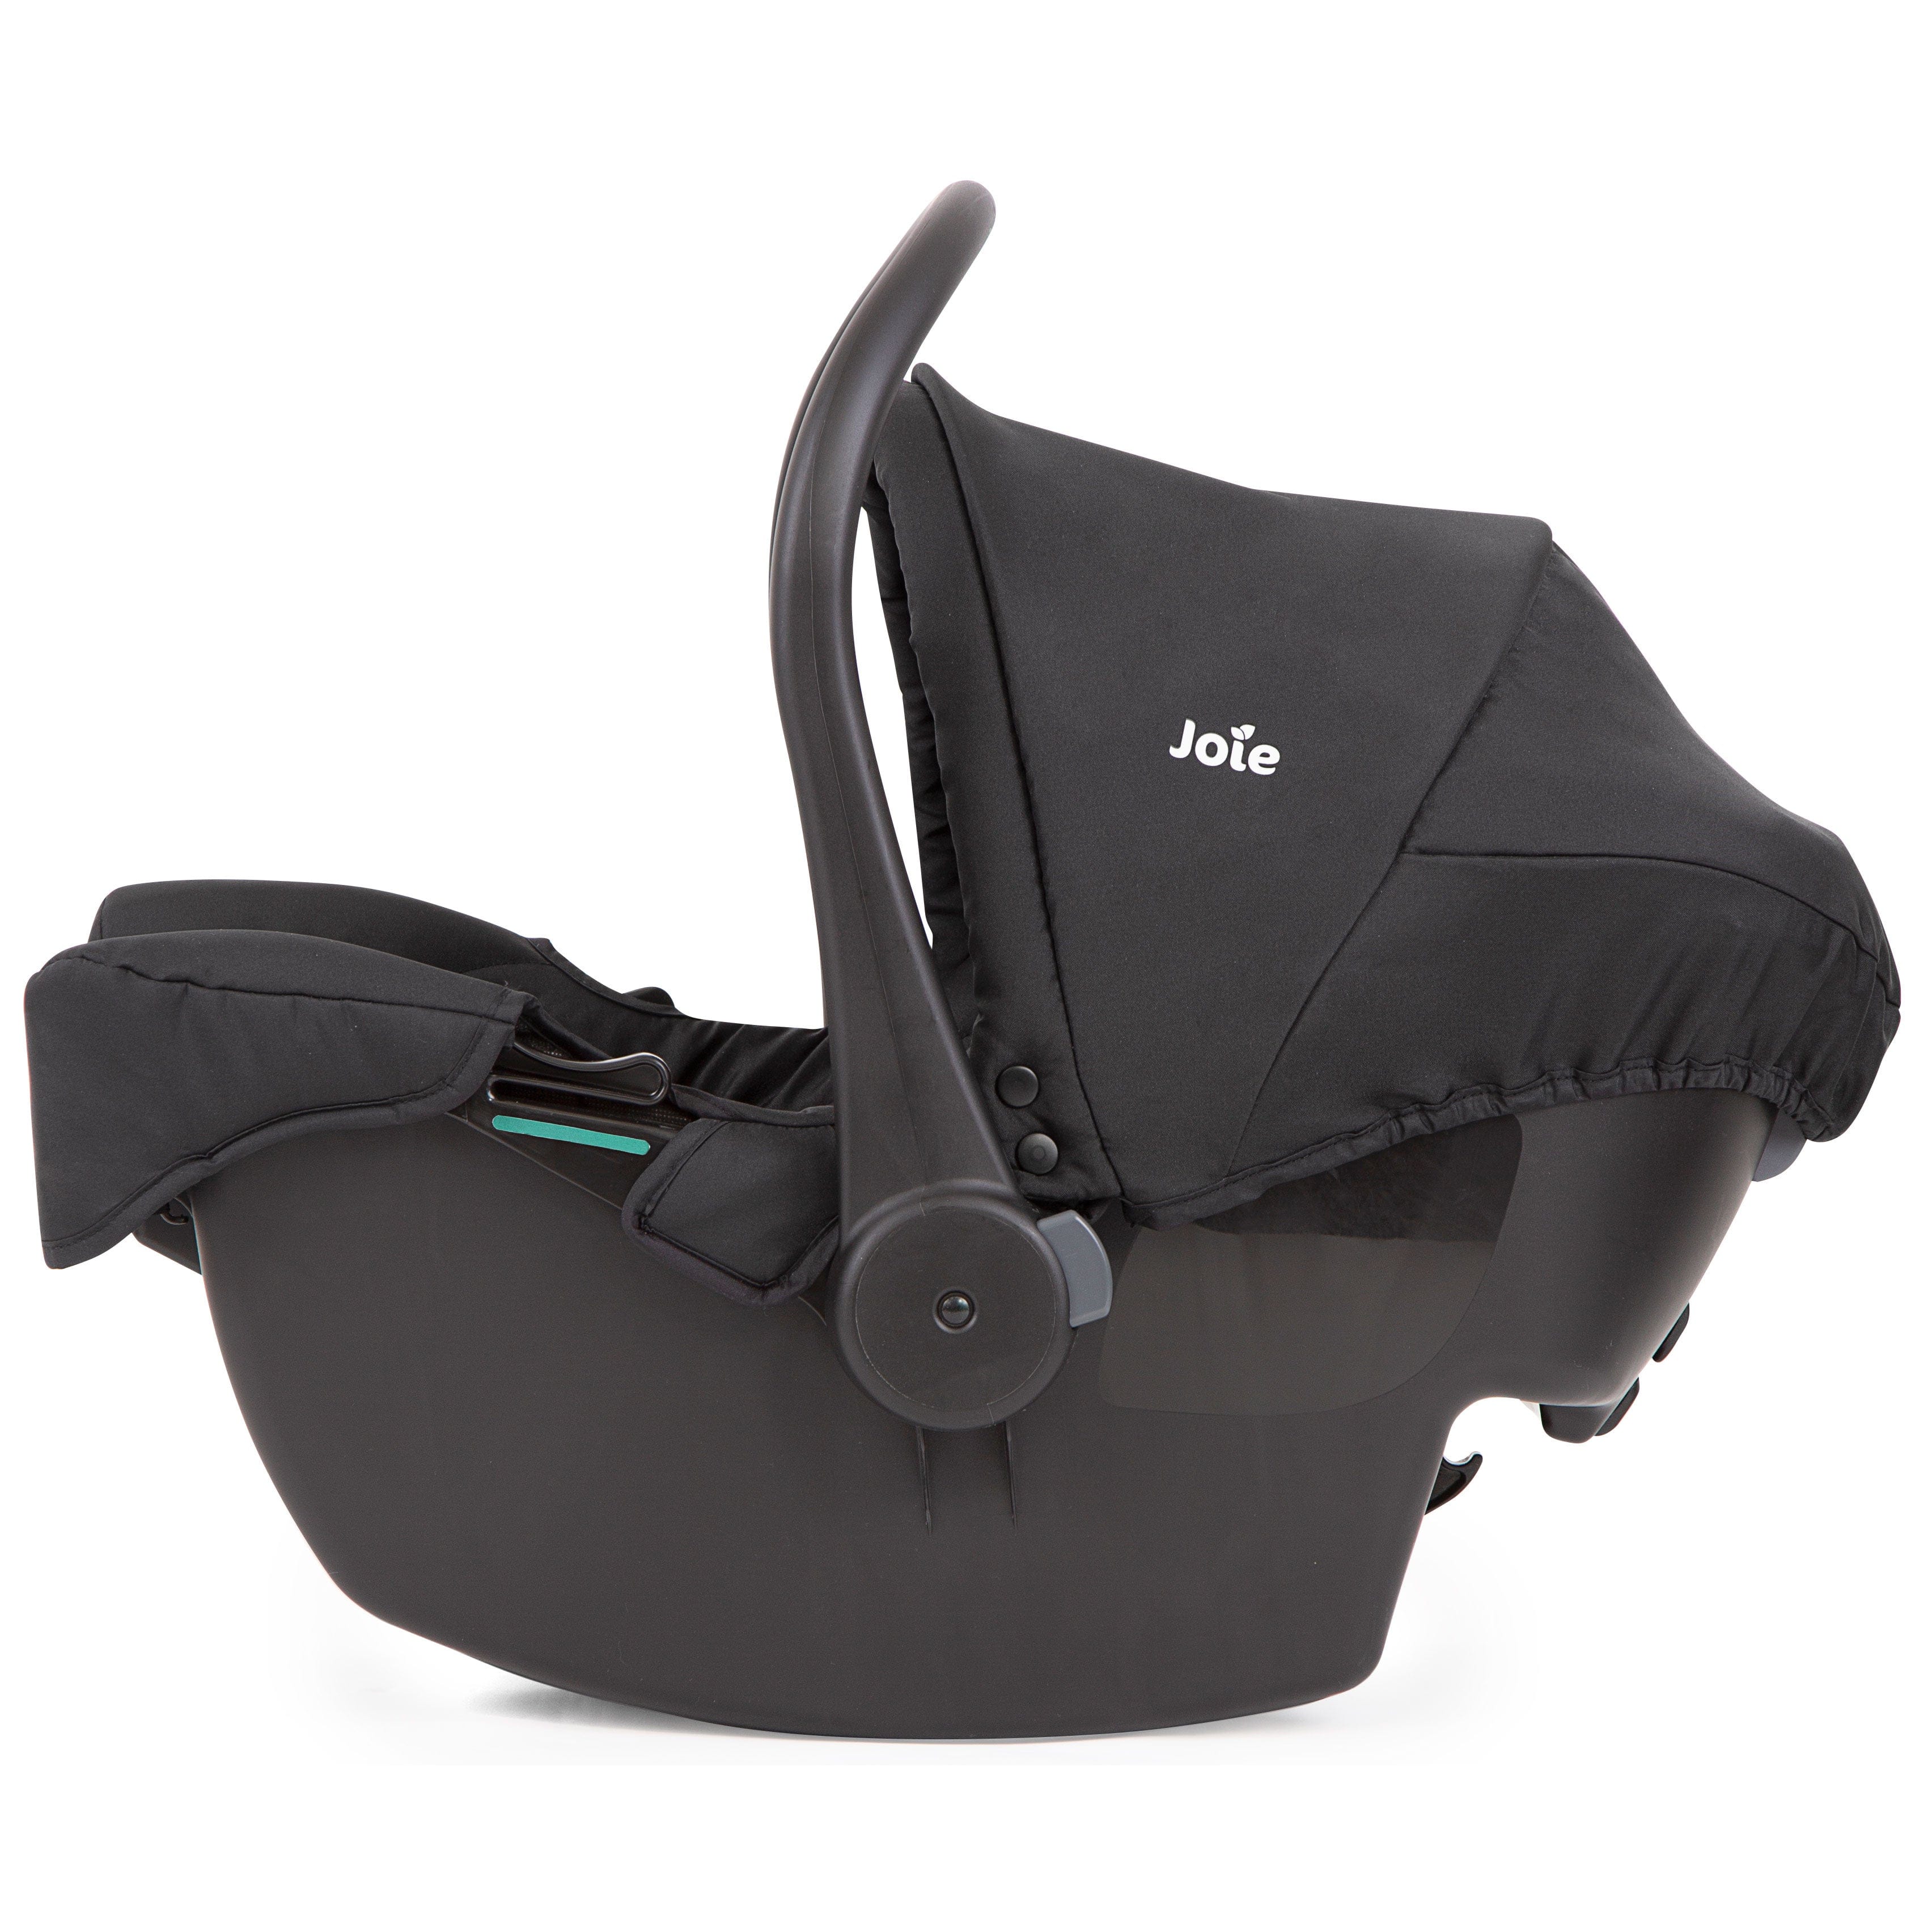 Joie baby carriers Joie i-Juva R129 i-Size Infant Carrier - Shale C2114AASHA000